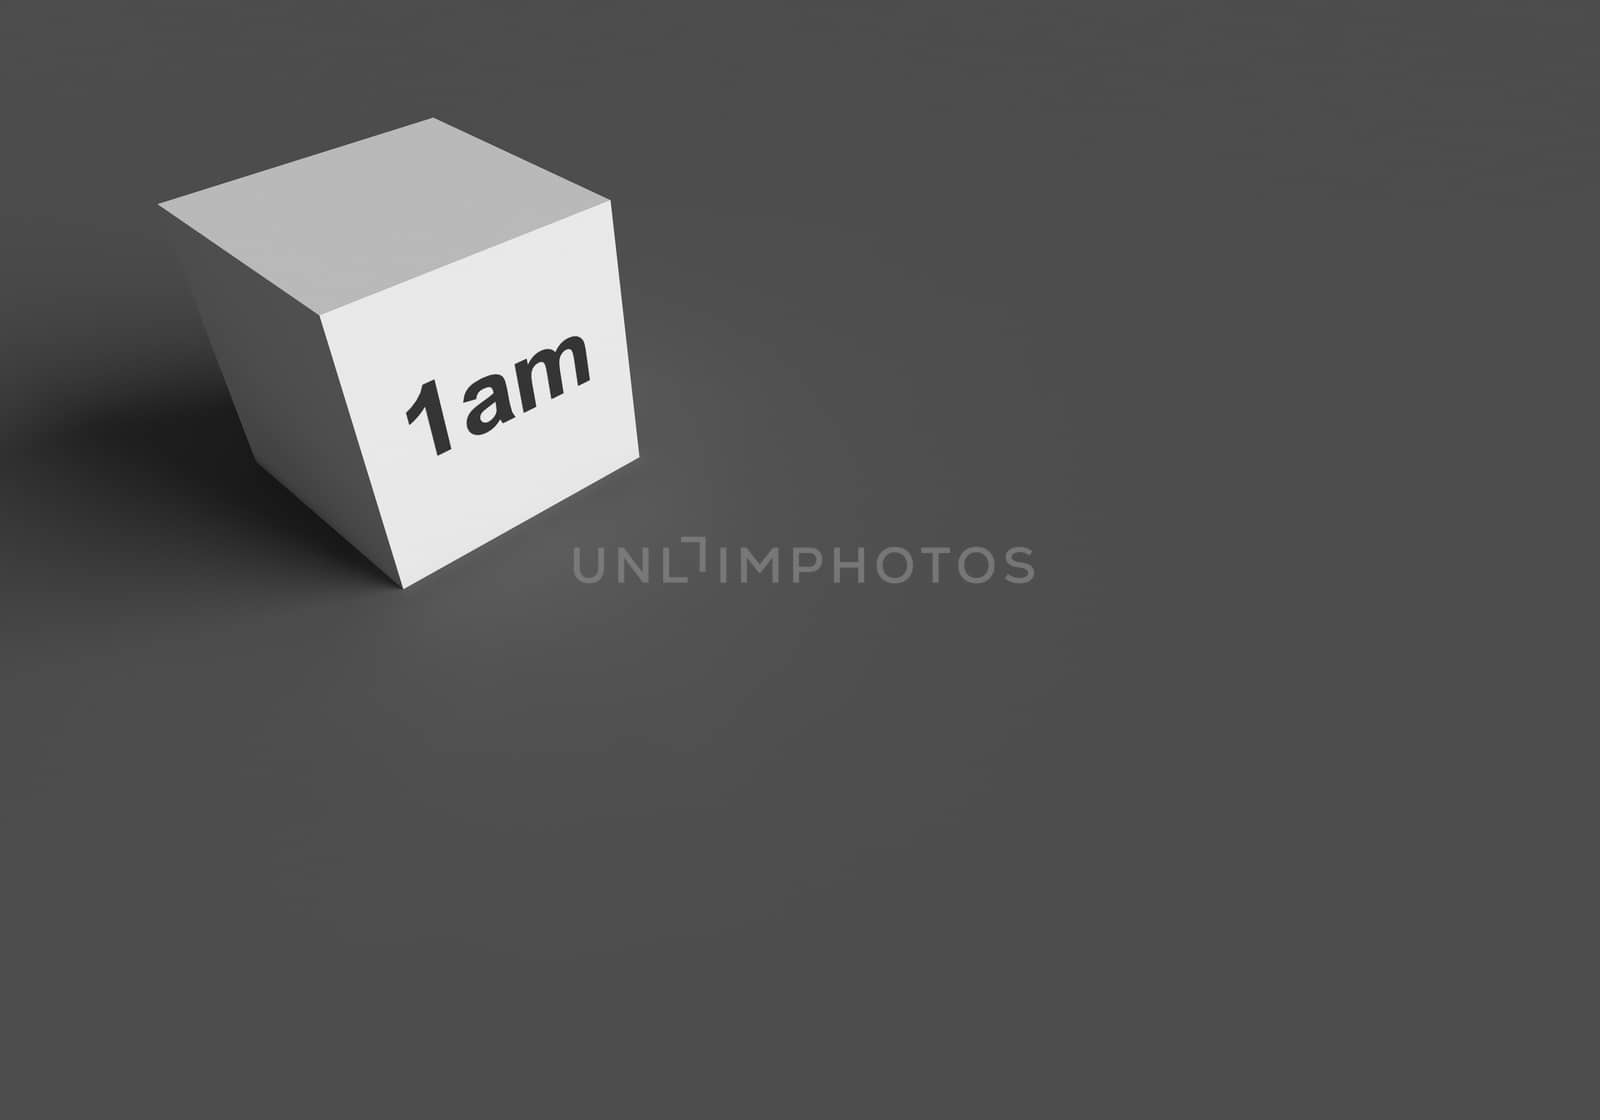 3D RENDERING WORDS 1 am ON WHITE CUBE, STOCK PHOTO